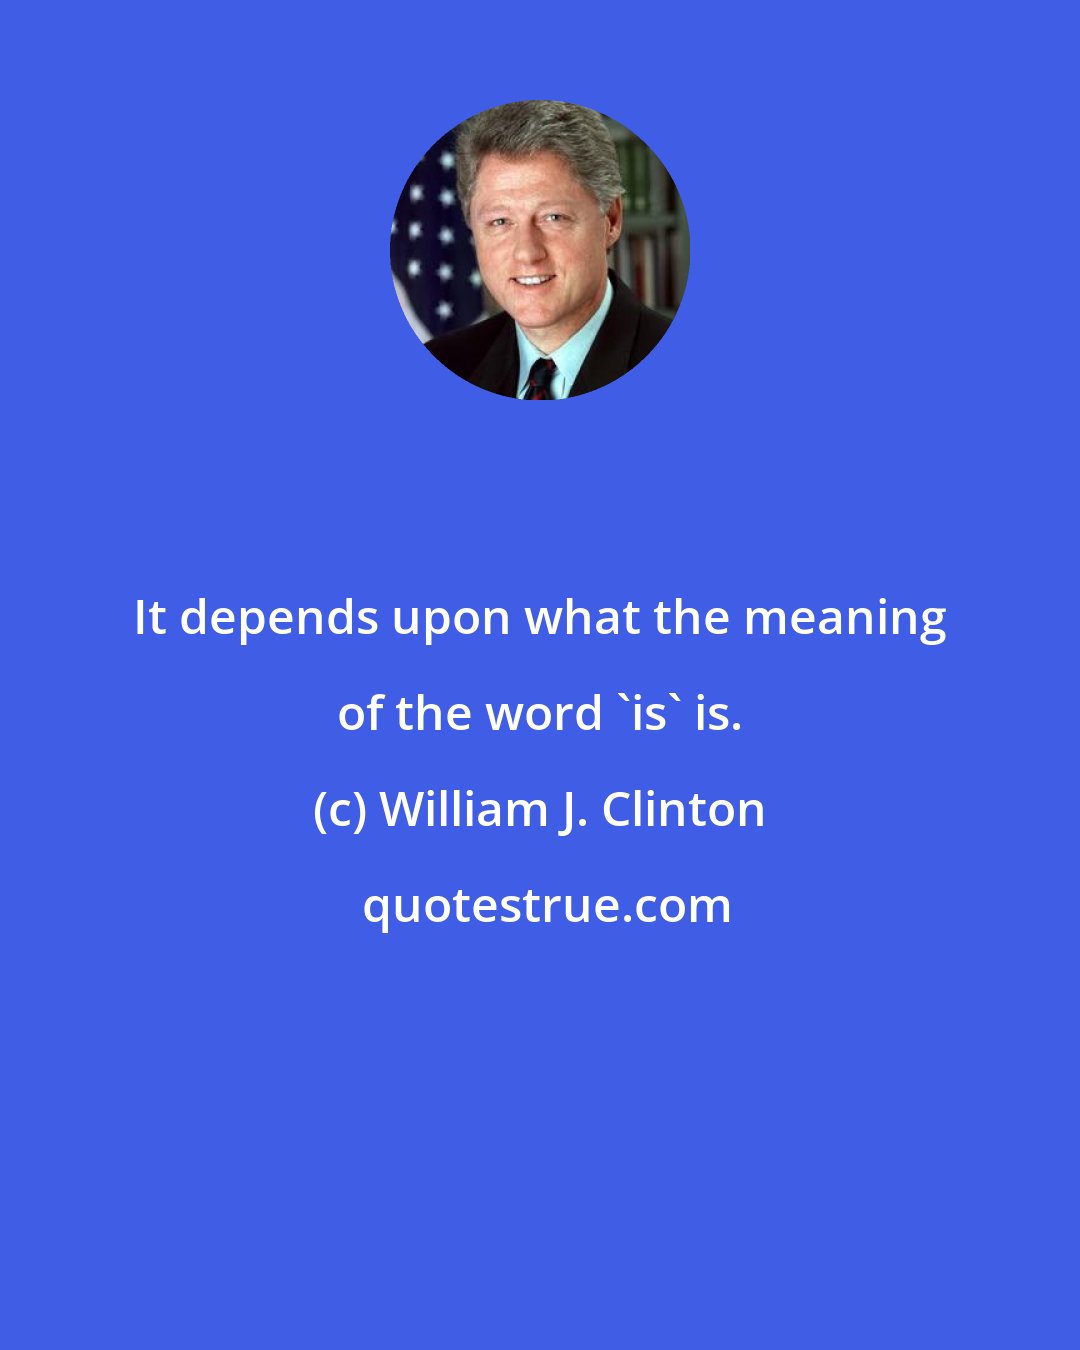 William J. Clinton: It depends upon what the meaning of the word 'is' is.